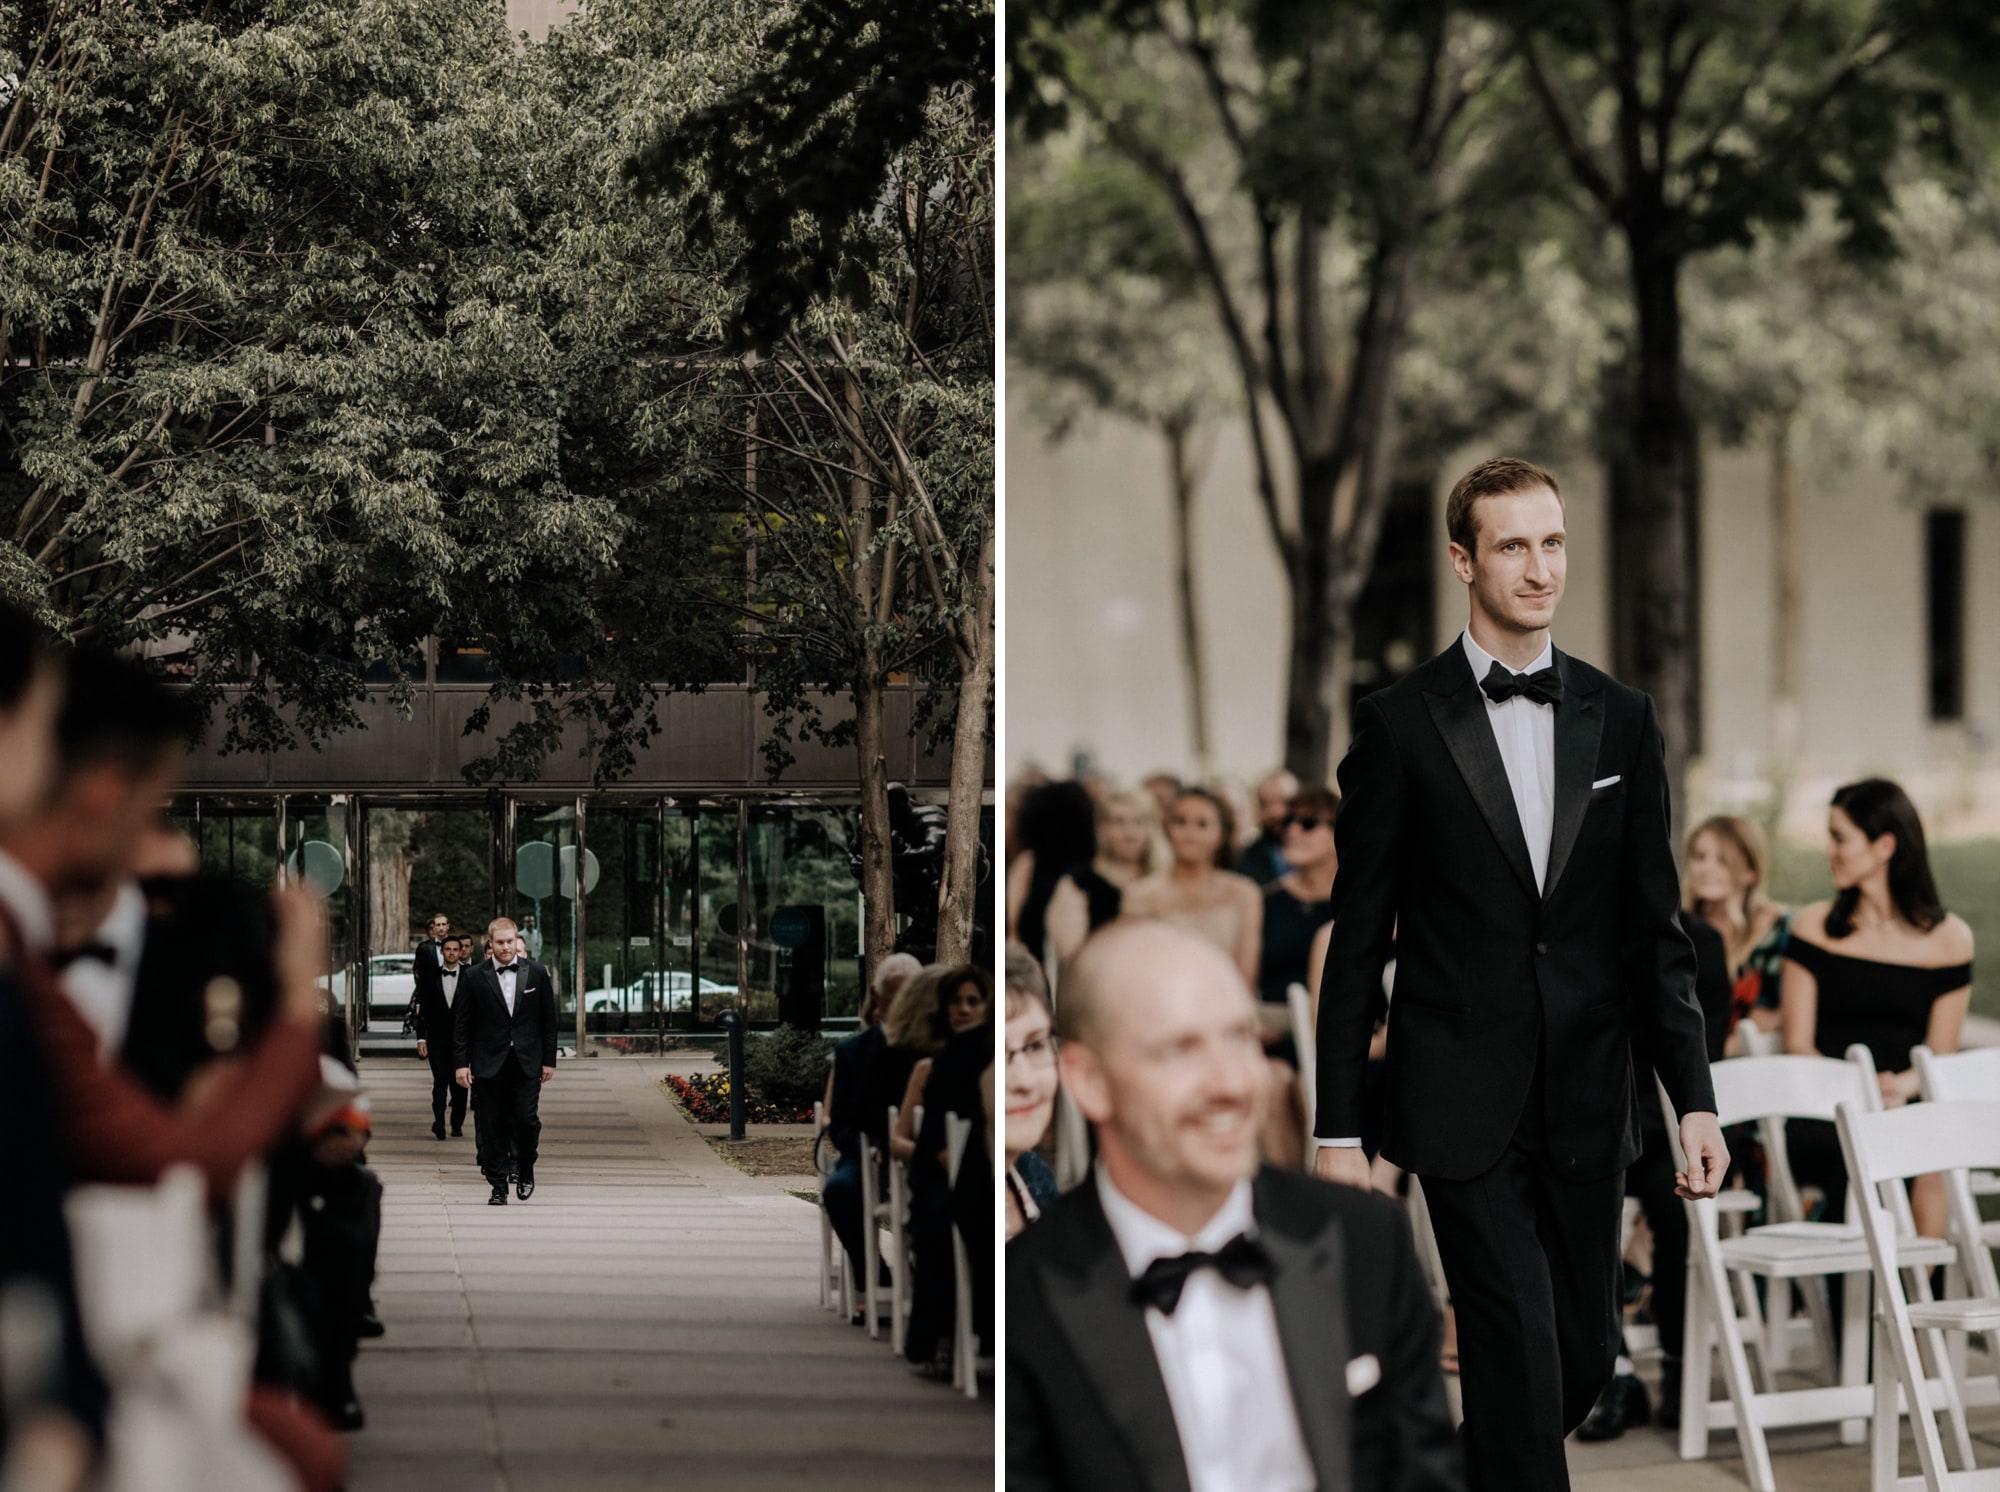 Groomsmen walking down the aisle at an outdoor wedding ceremony at the Minneapolis Institute of Art.